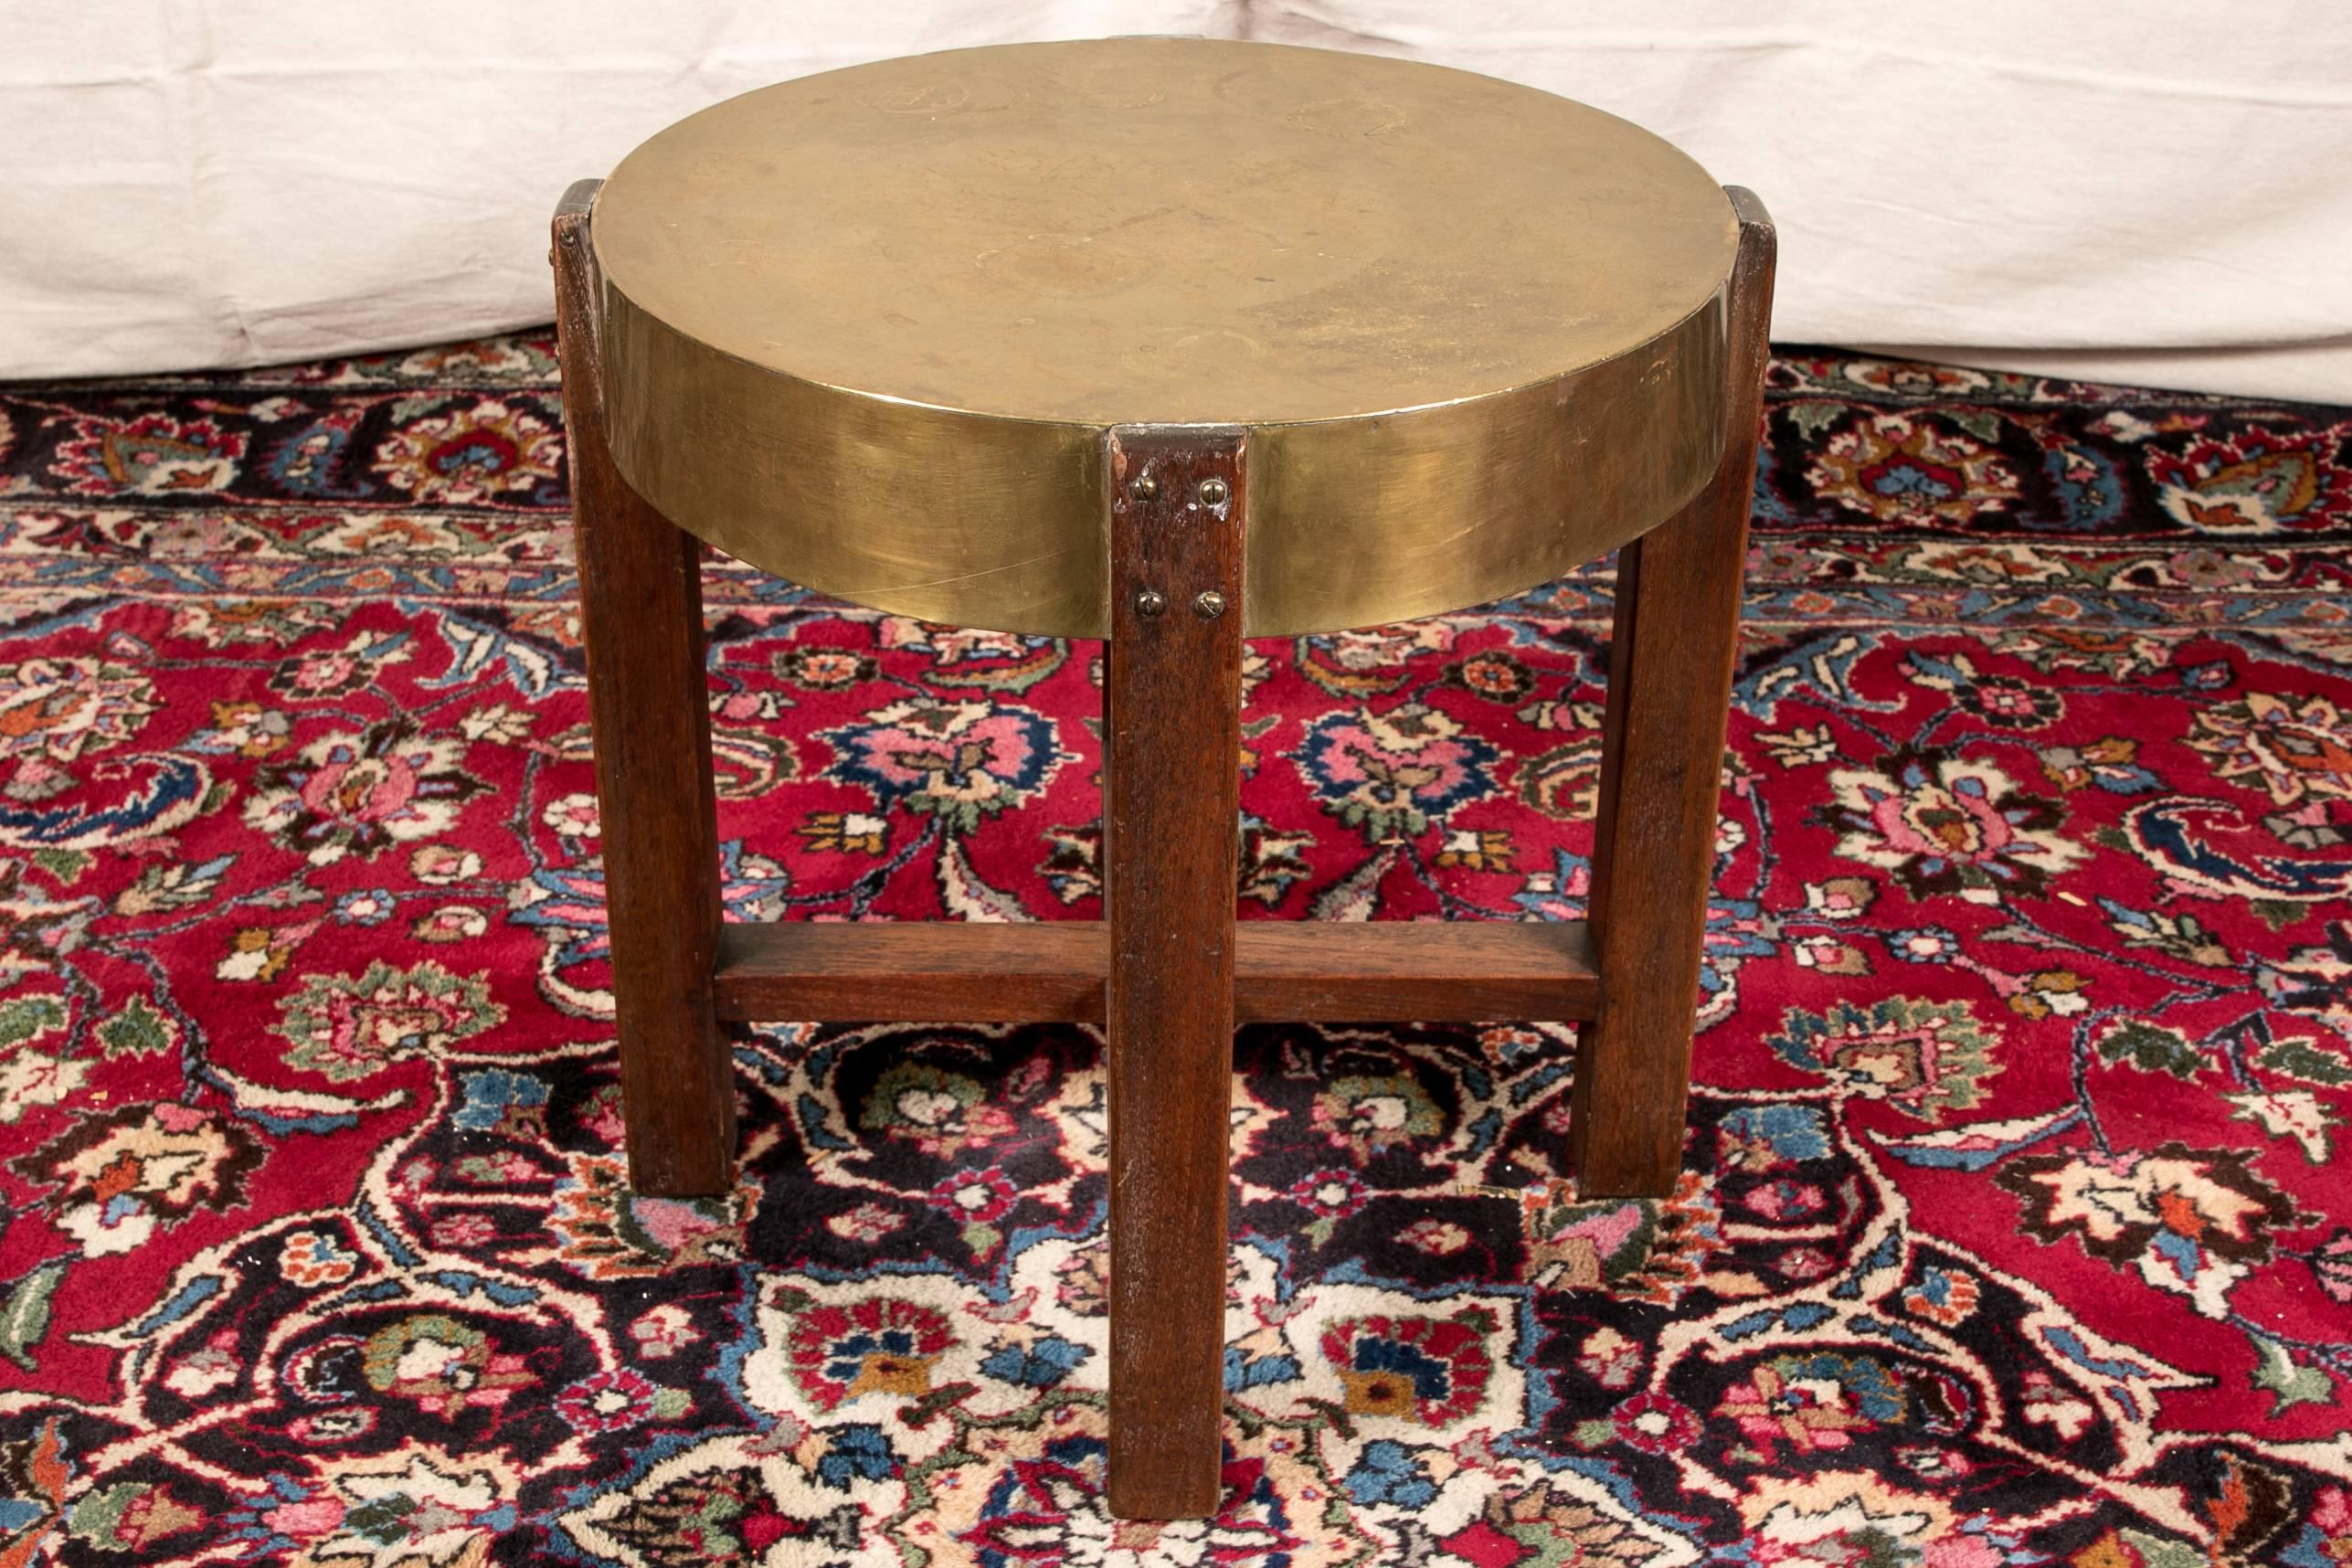 Arts & Crafts side table, circular brass top supported by mahogany base, two cross-stretcher bases.

Condition: Expected wear and signs of use including some surface scratching and sporadic nicking, some discoloration and oxidation top.